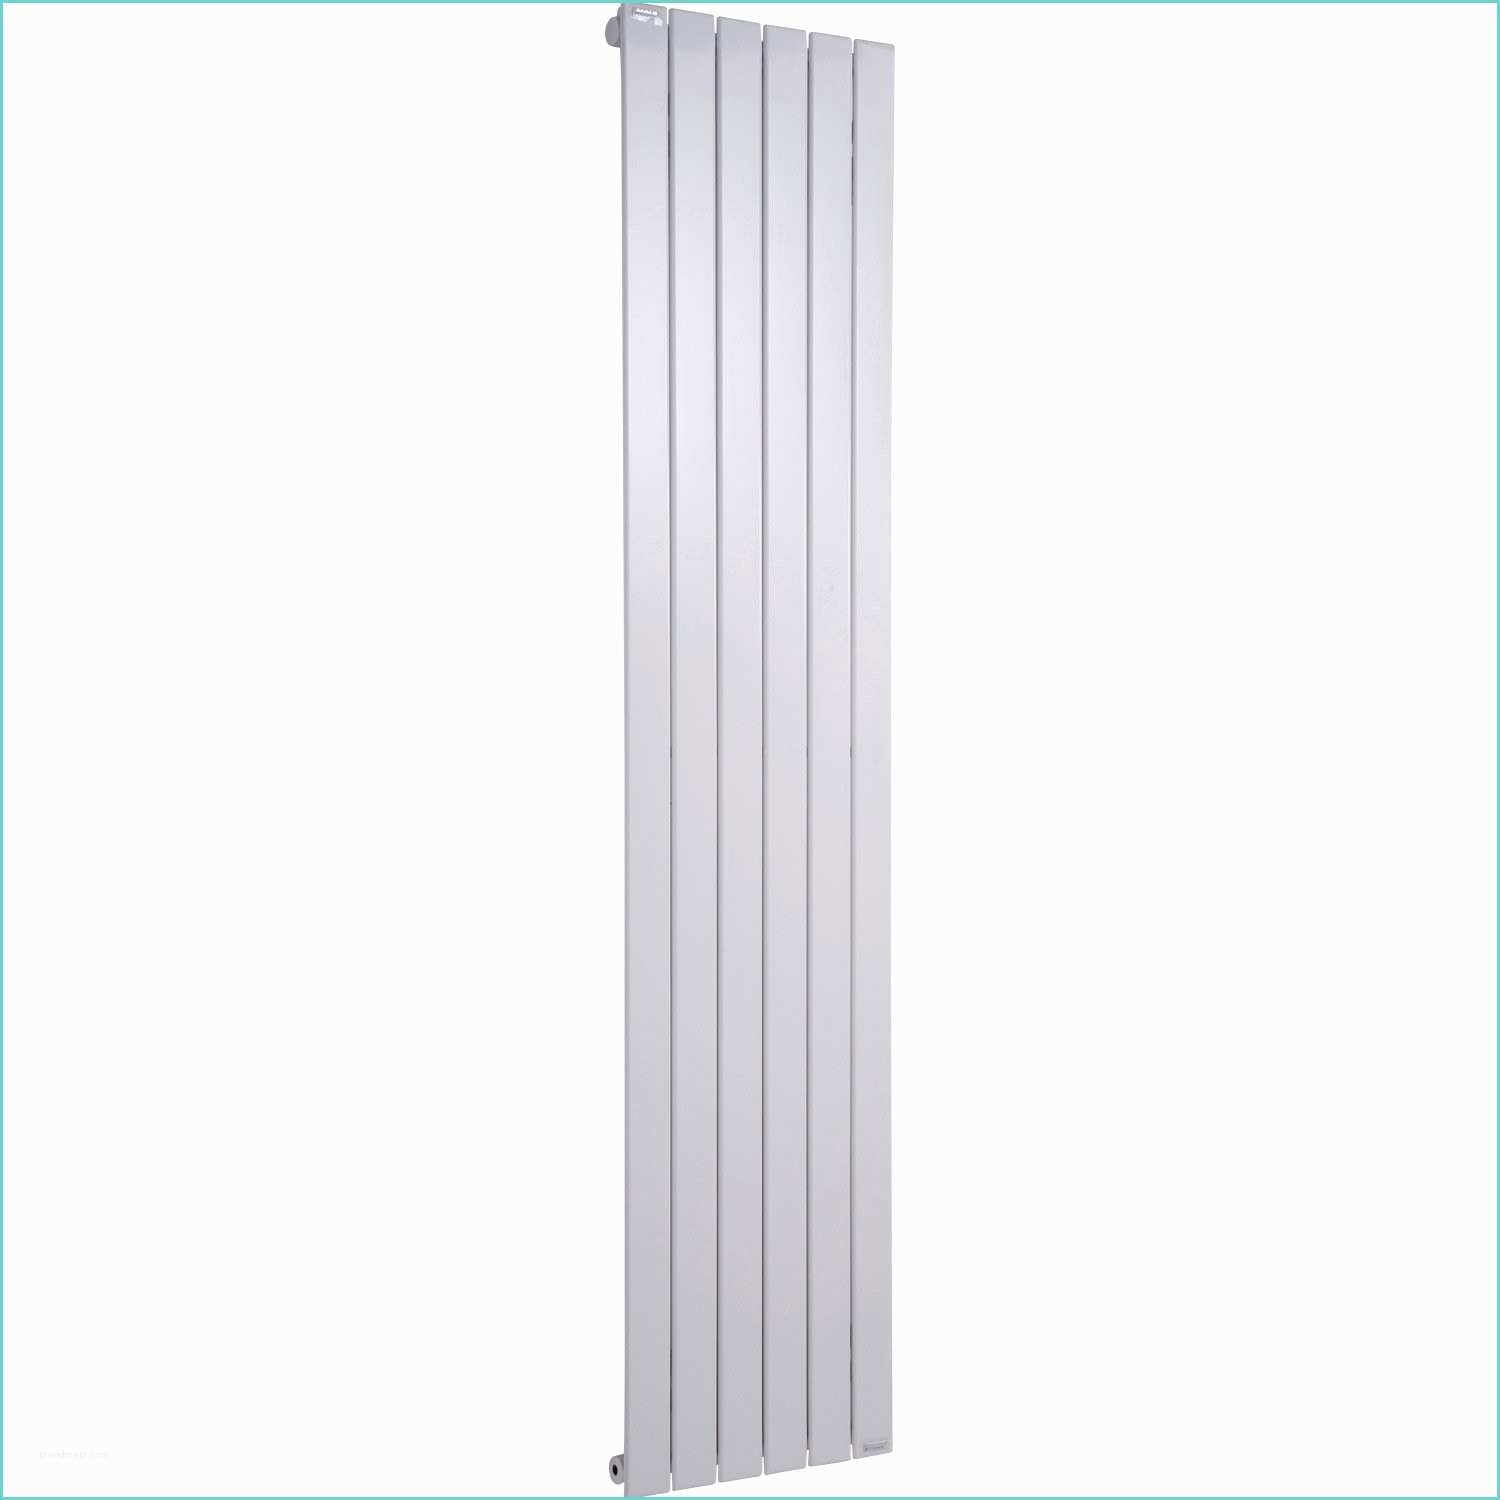 Grille Cache Radiateur Leroy Merlin Support Radiateur Fonte Leroy Merlin formidable Radiateur